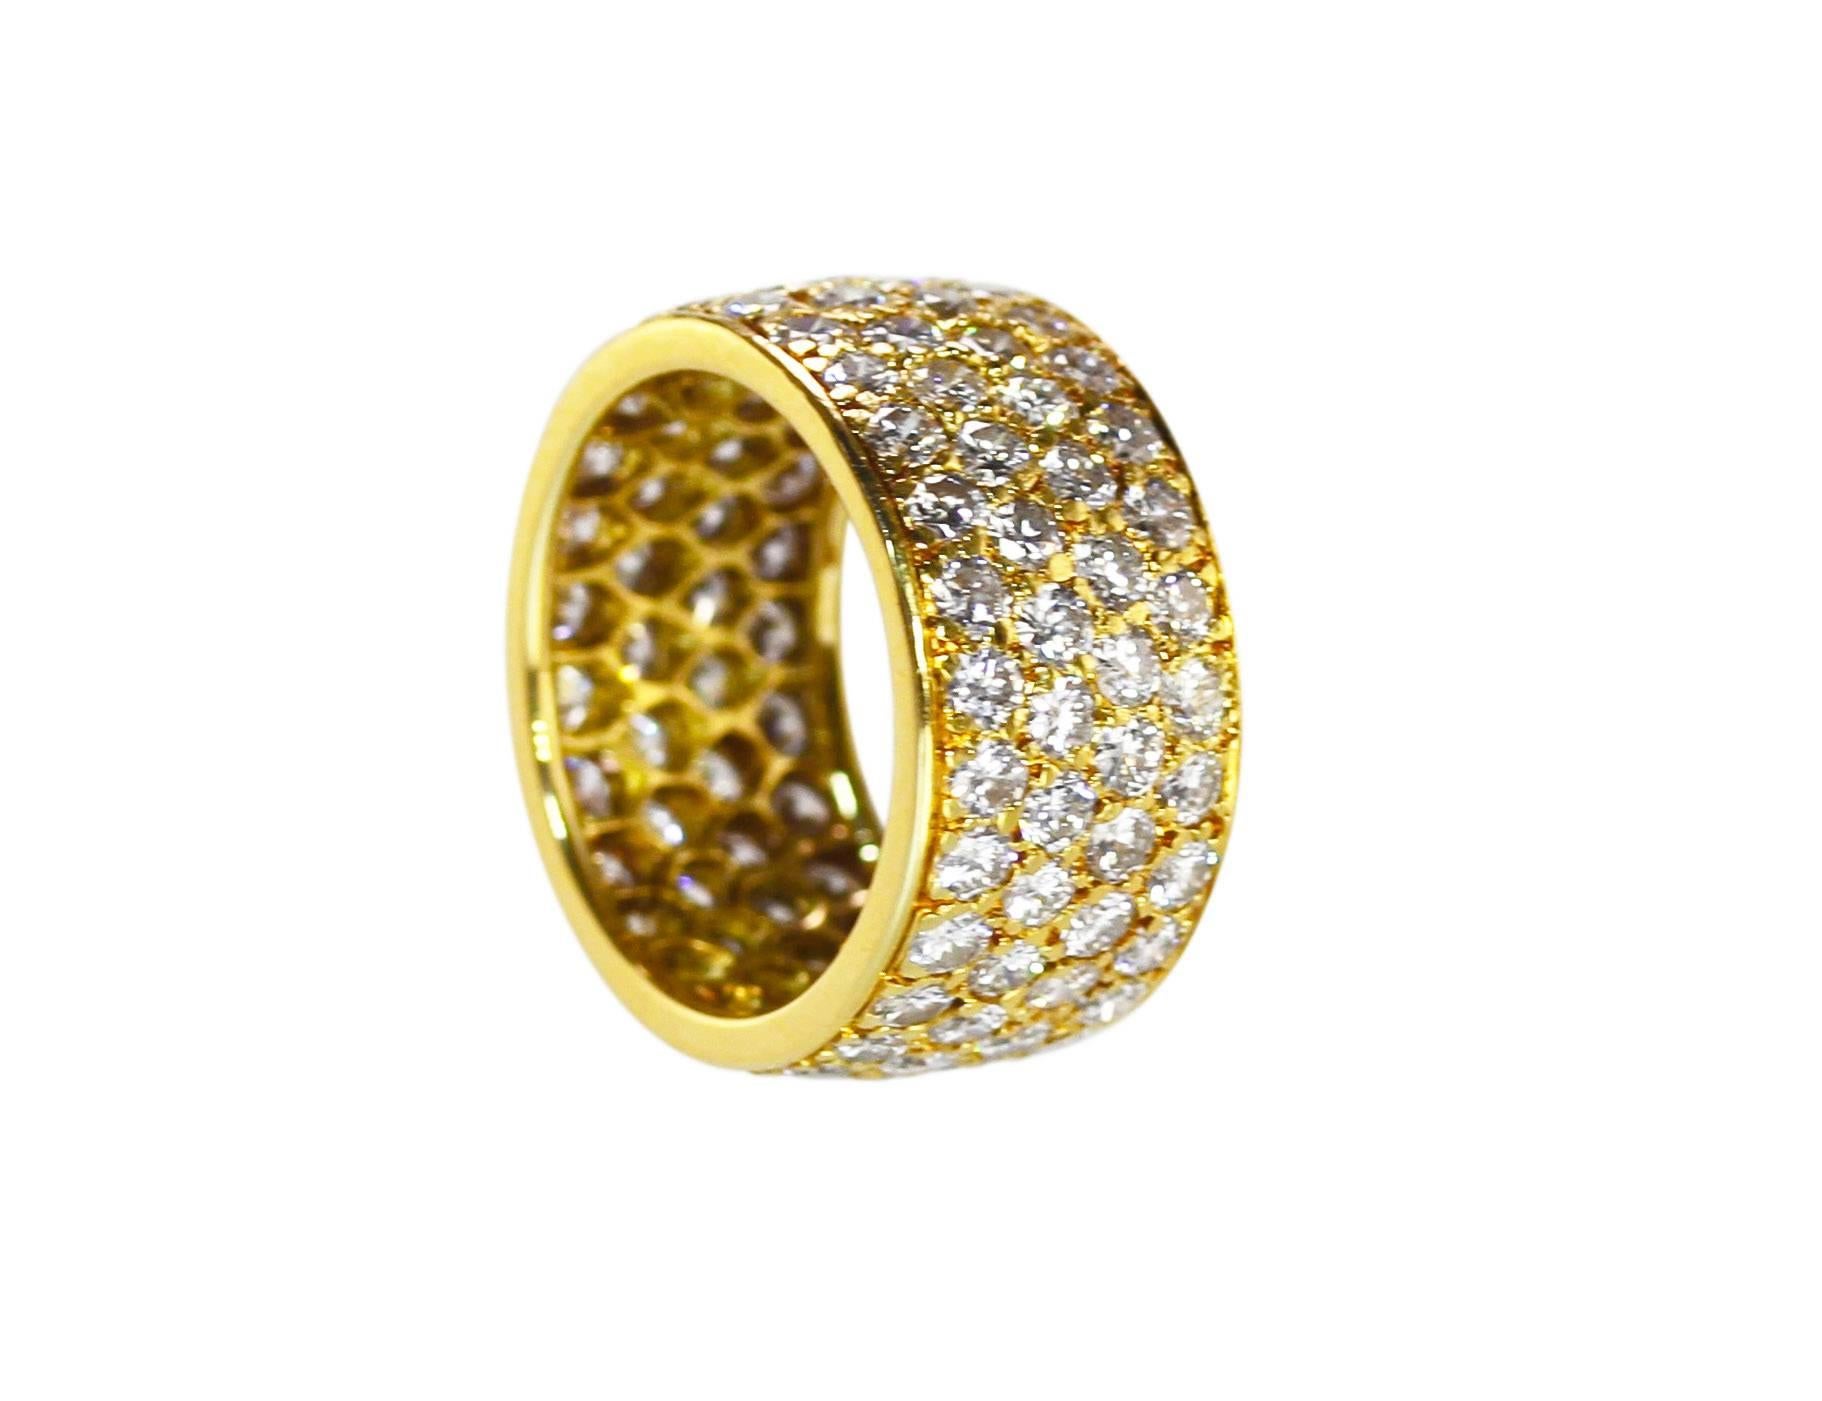 An 18 karat gold and diamond band ring by Van Cleef & Arpels, circa 1970, pavé set with 104 round diamonds designed in 4 rows weighing approximately 4.35 carats, measuring 3/8 by 3/4 by 3/4 inch, size 5 3/4, gross weight 7.2 grams, signed VCA,